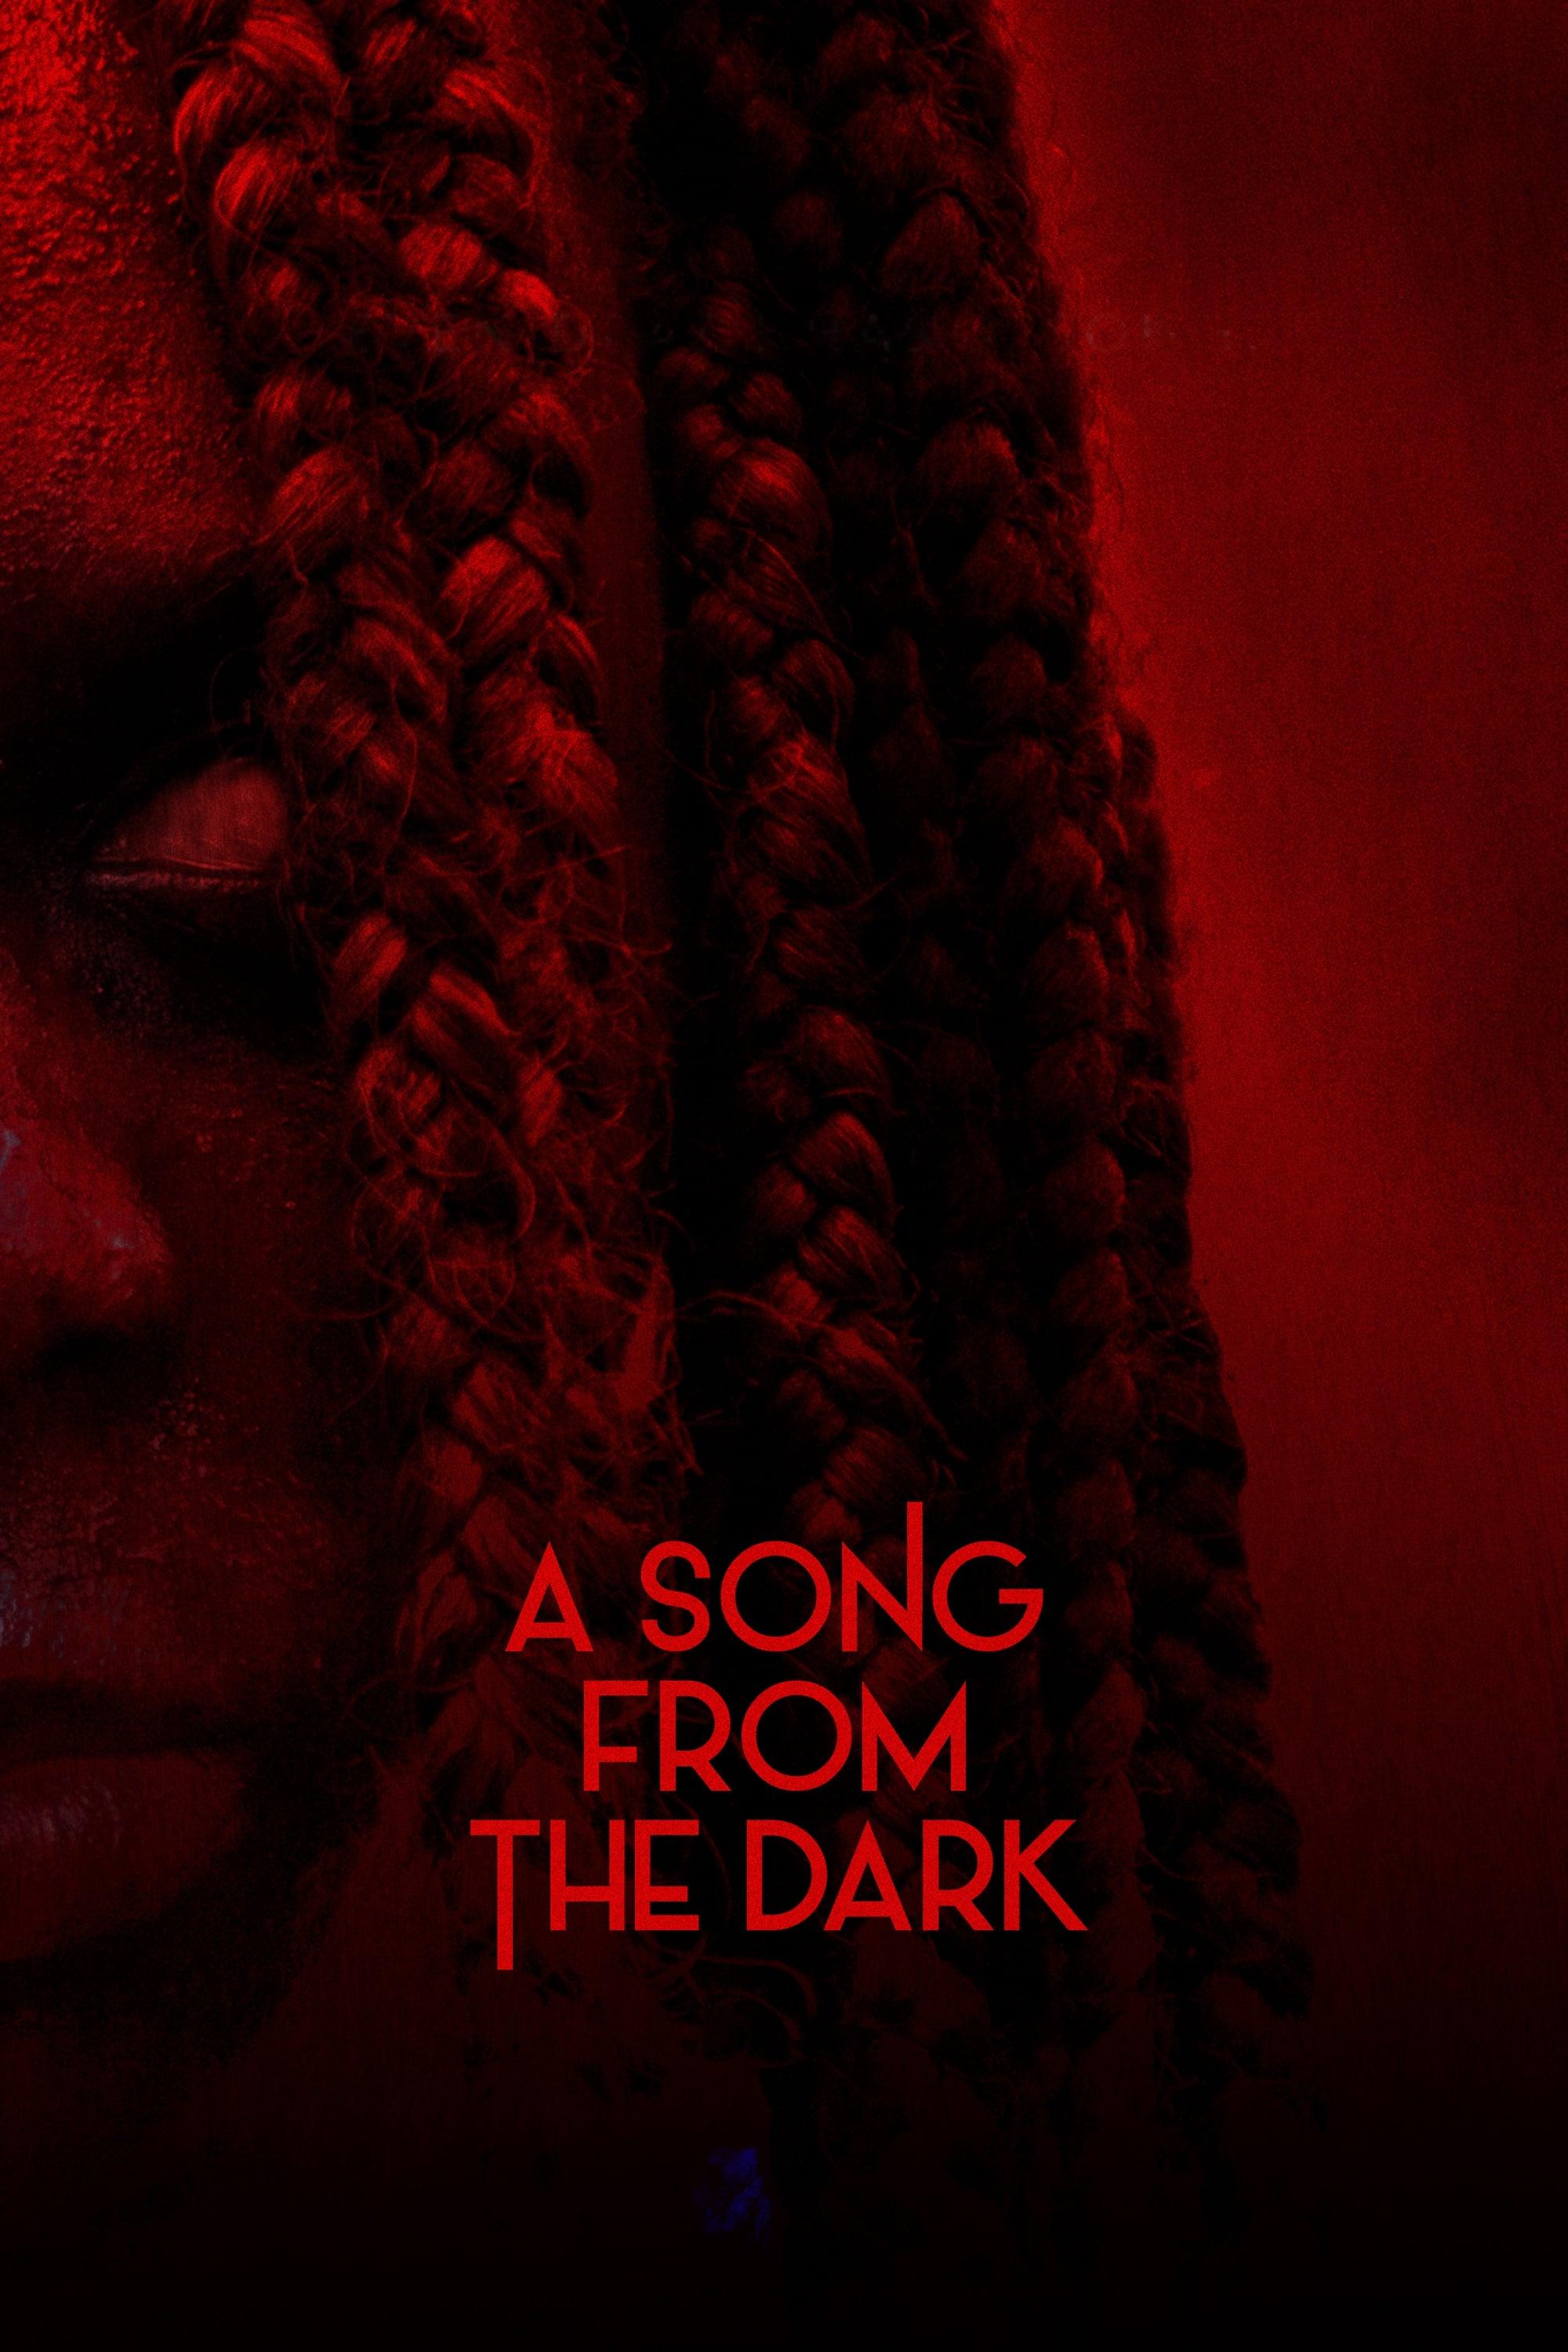 A Song from the Dark poster